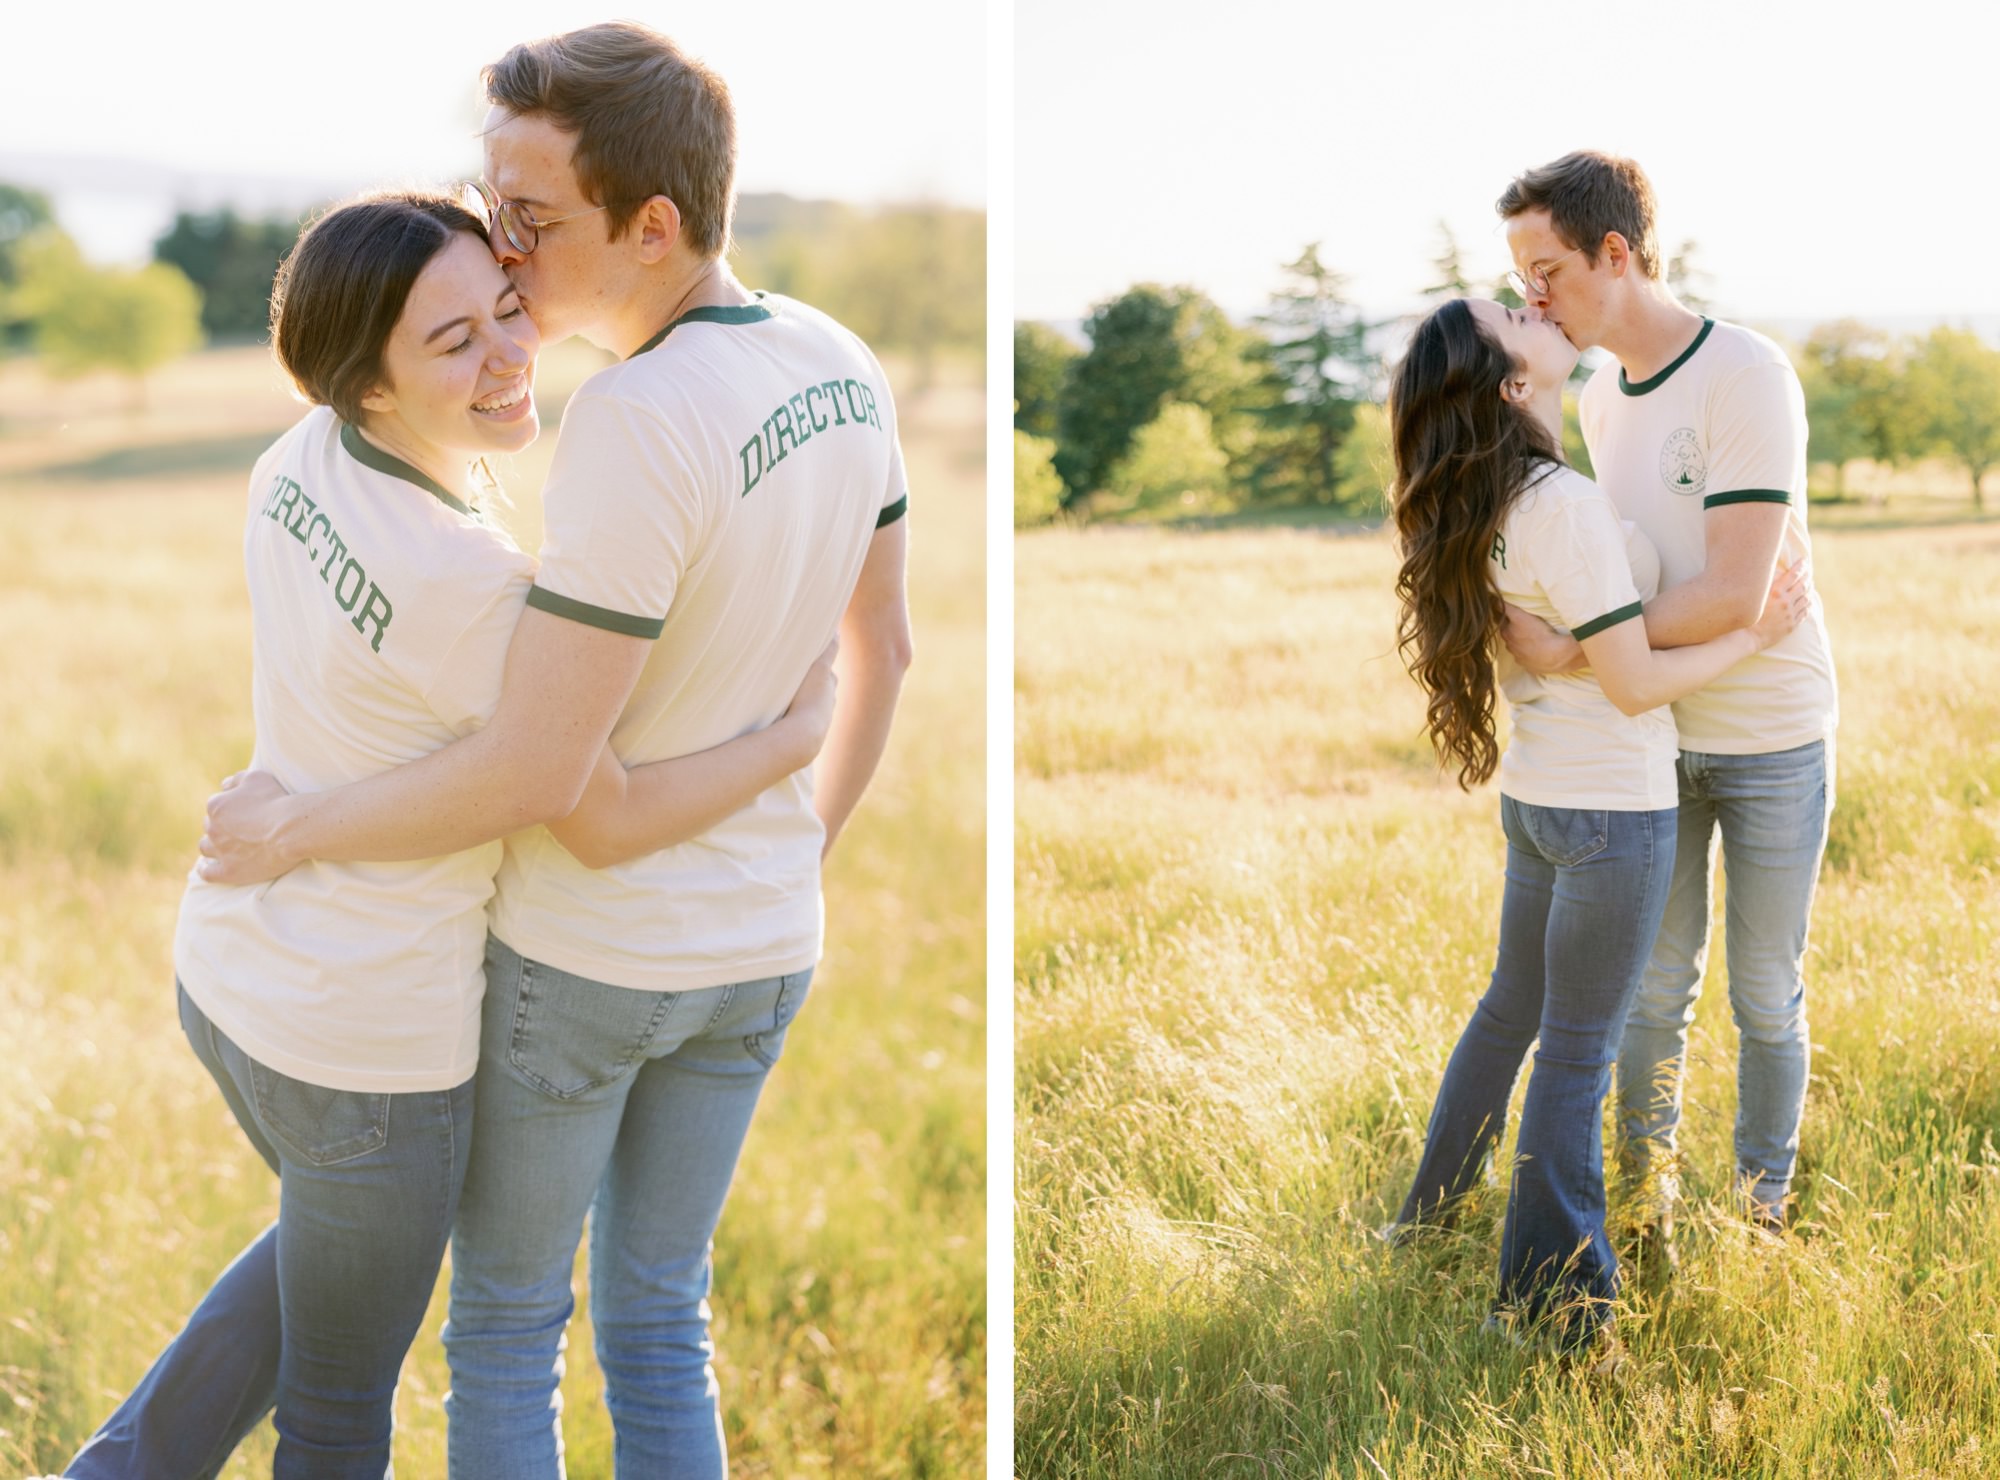 A couple sharing a kiss during a sunset in a grassy field.